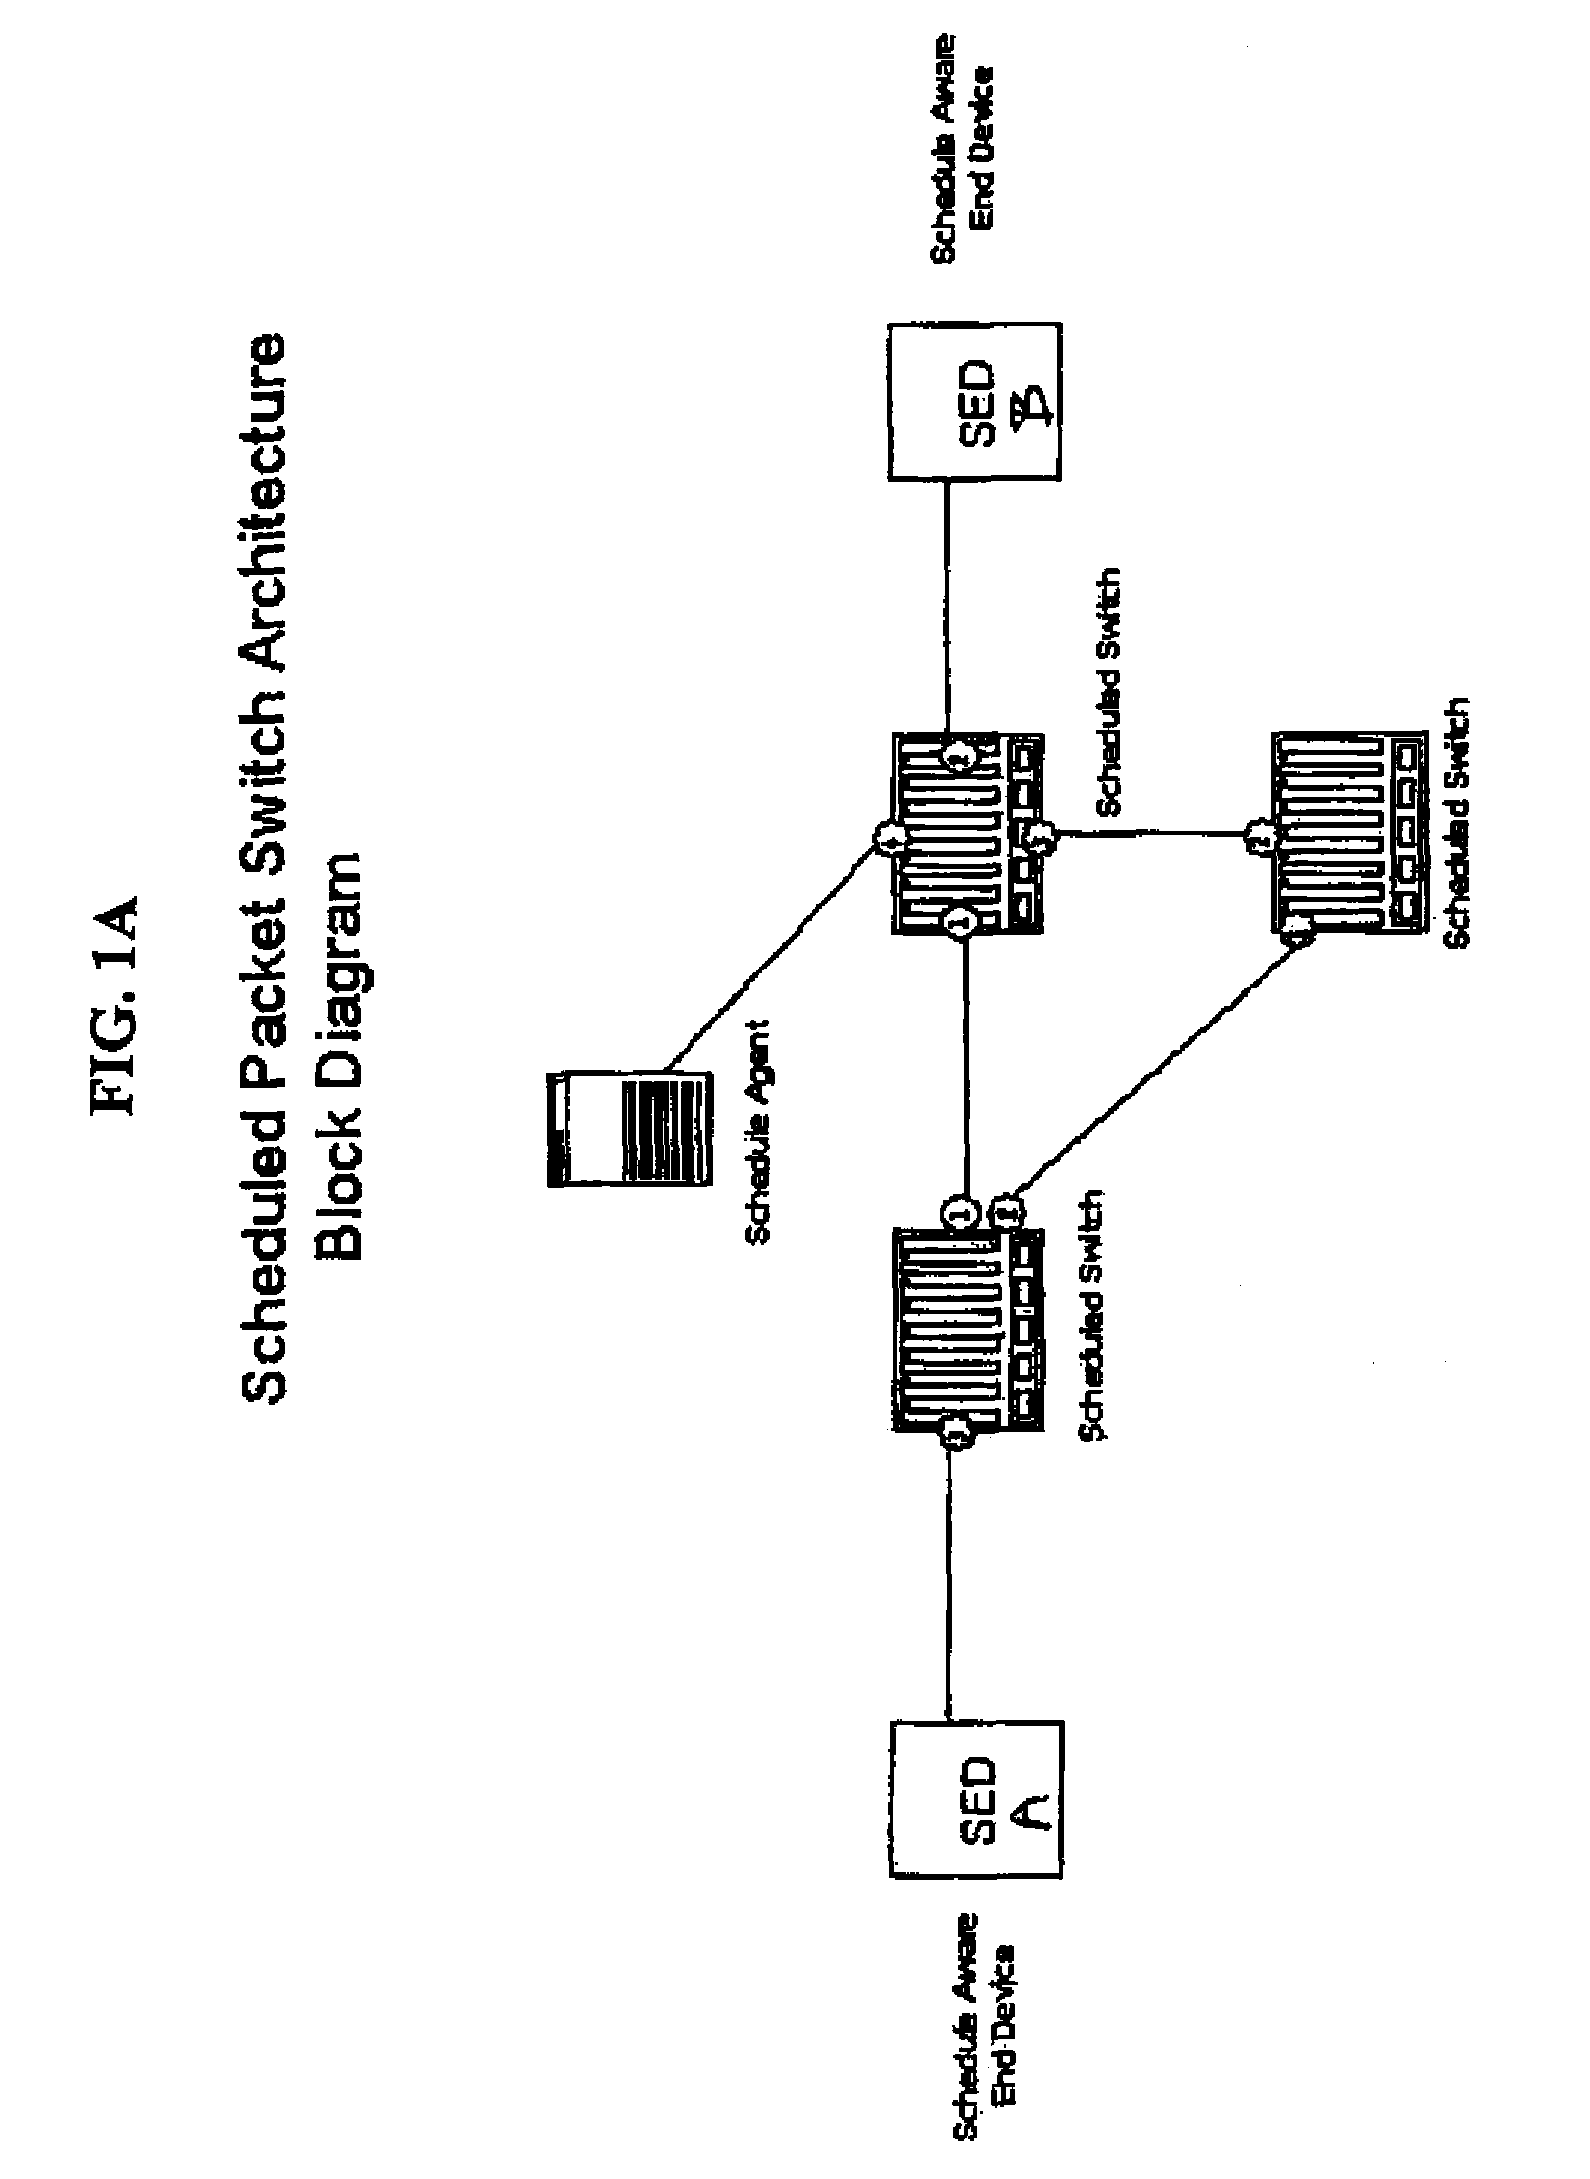 Method for achieving high-availability of itineraries in a real-time network scheduled packet routing system